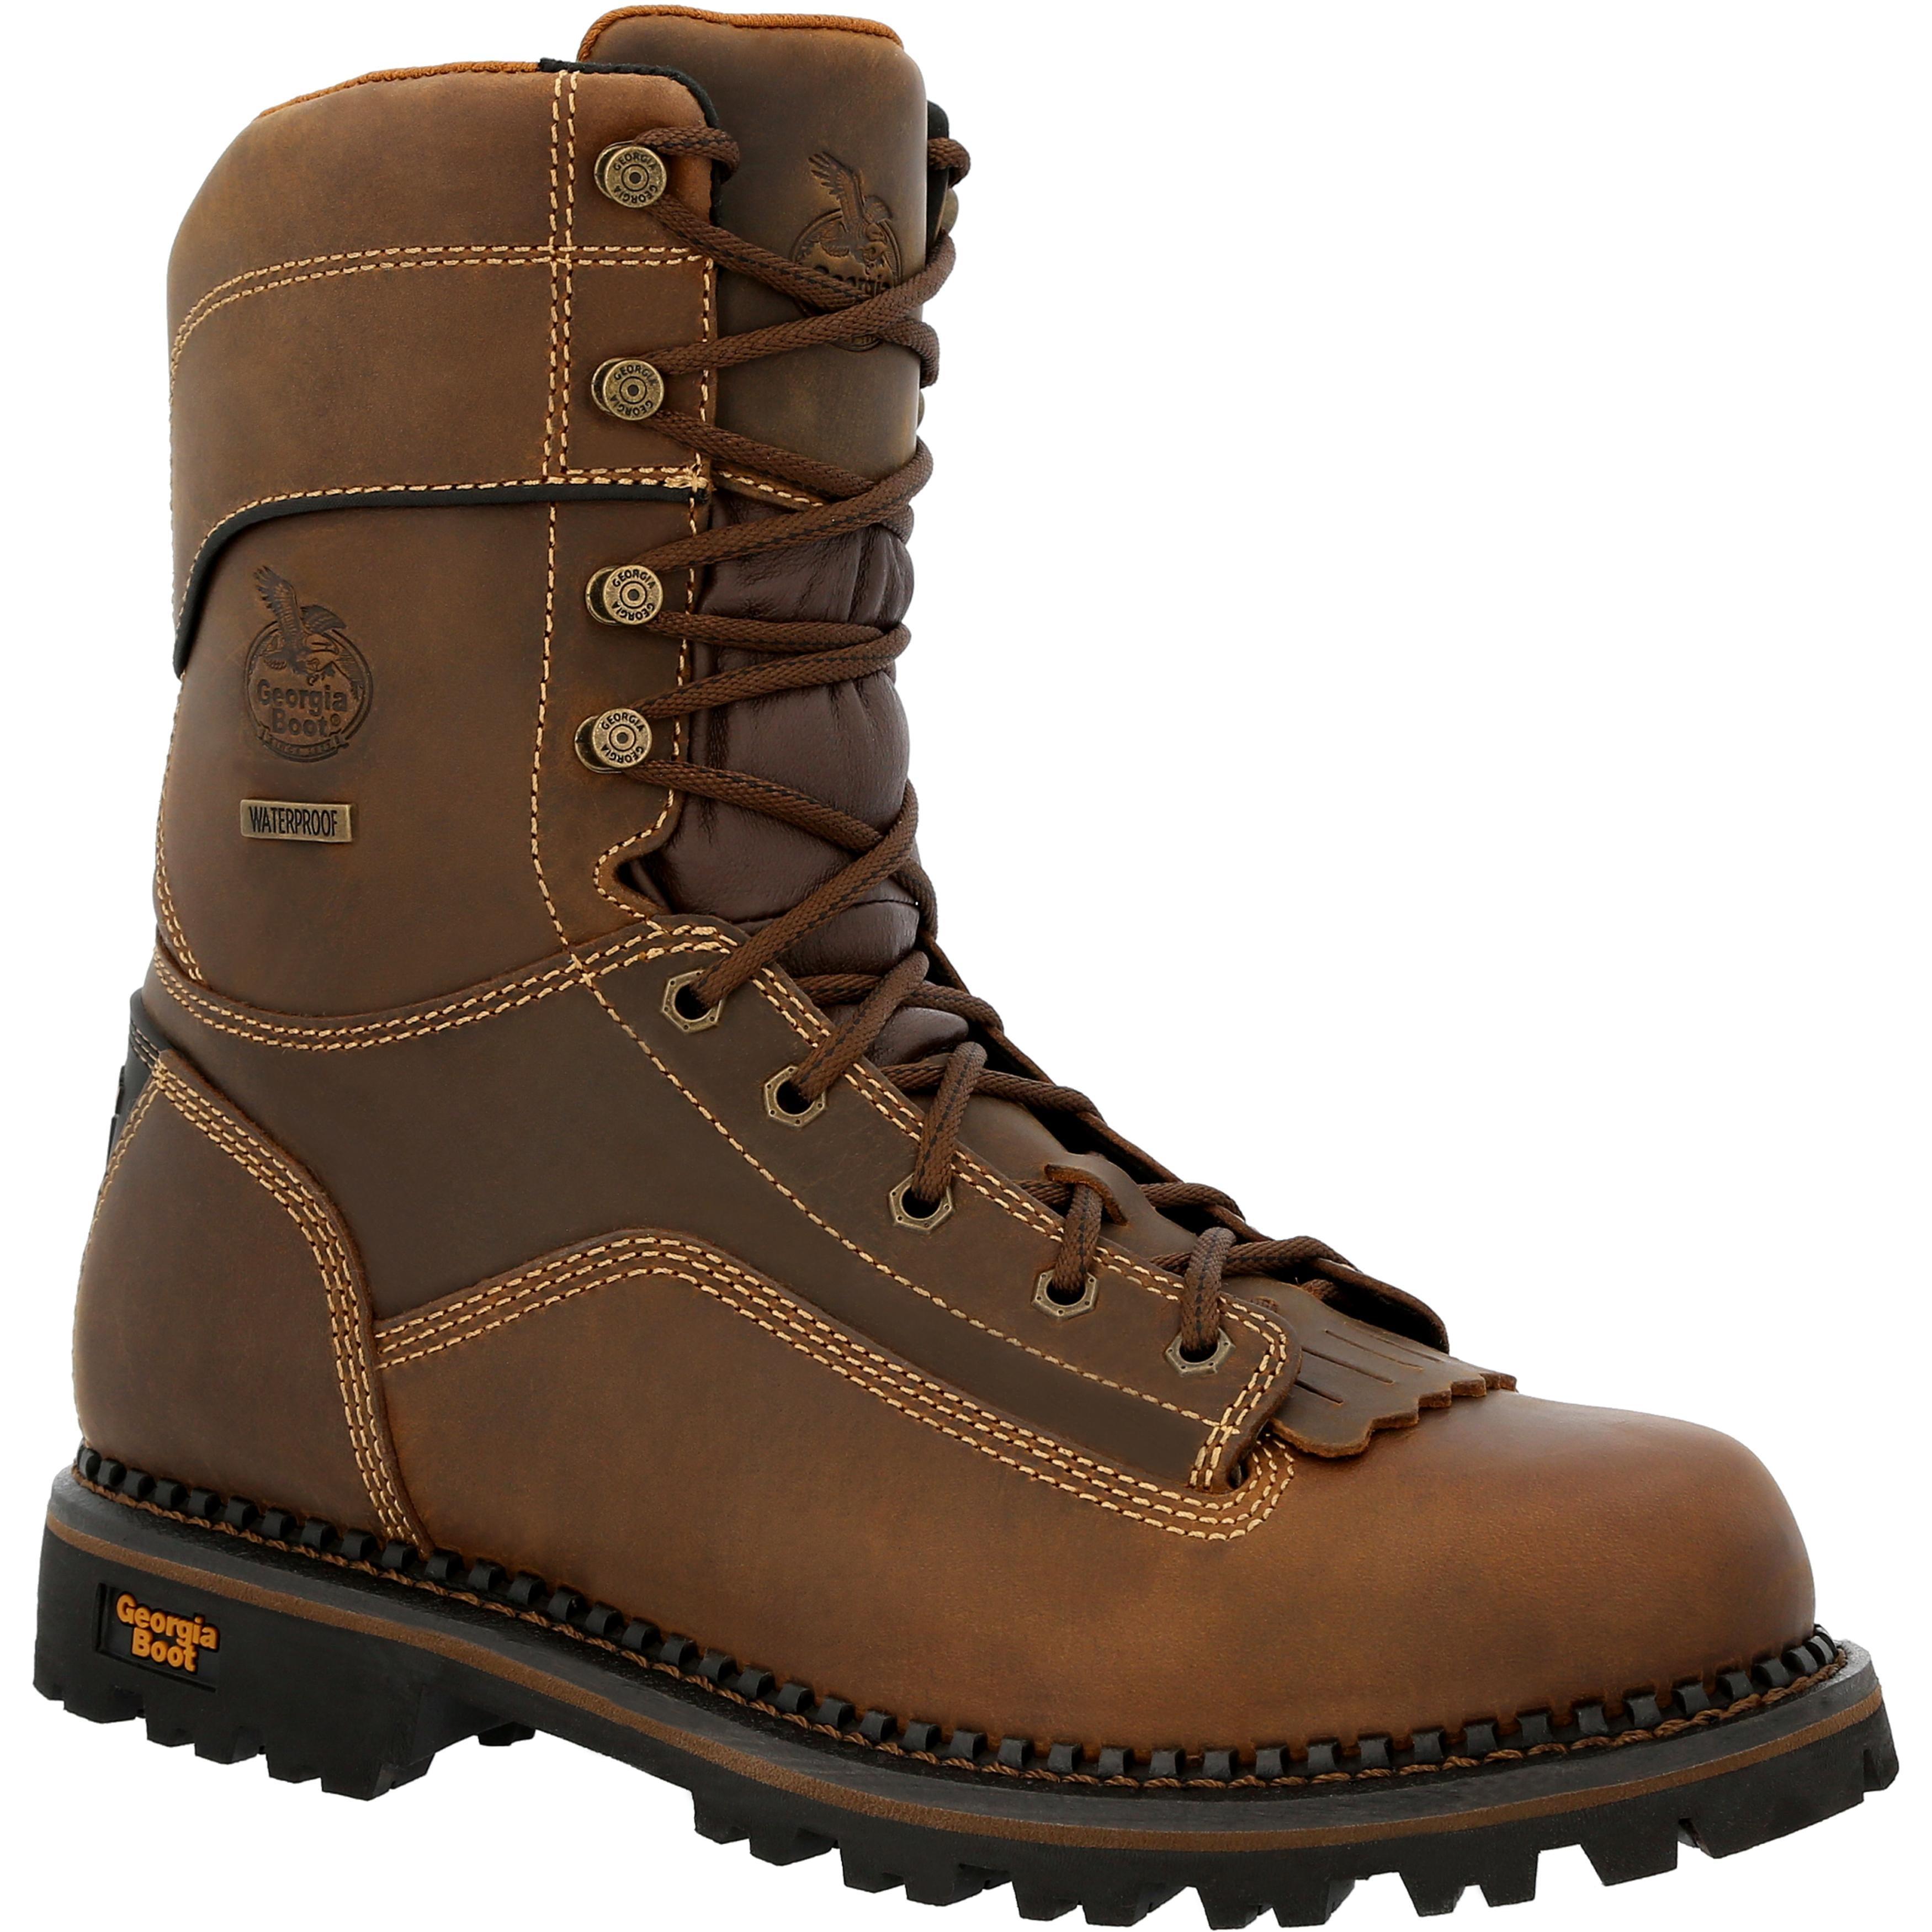 AdTec 8 Work Boots - Western Kiltie Lacers Women's Size 10 (Men's 9) -  clothing & accessories - by owner - apparel